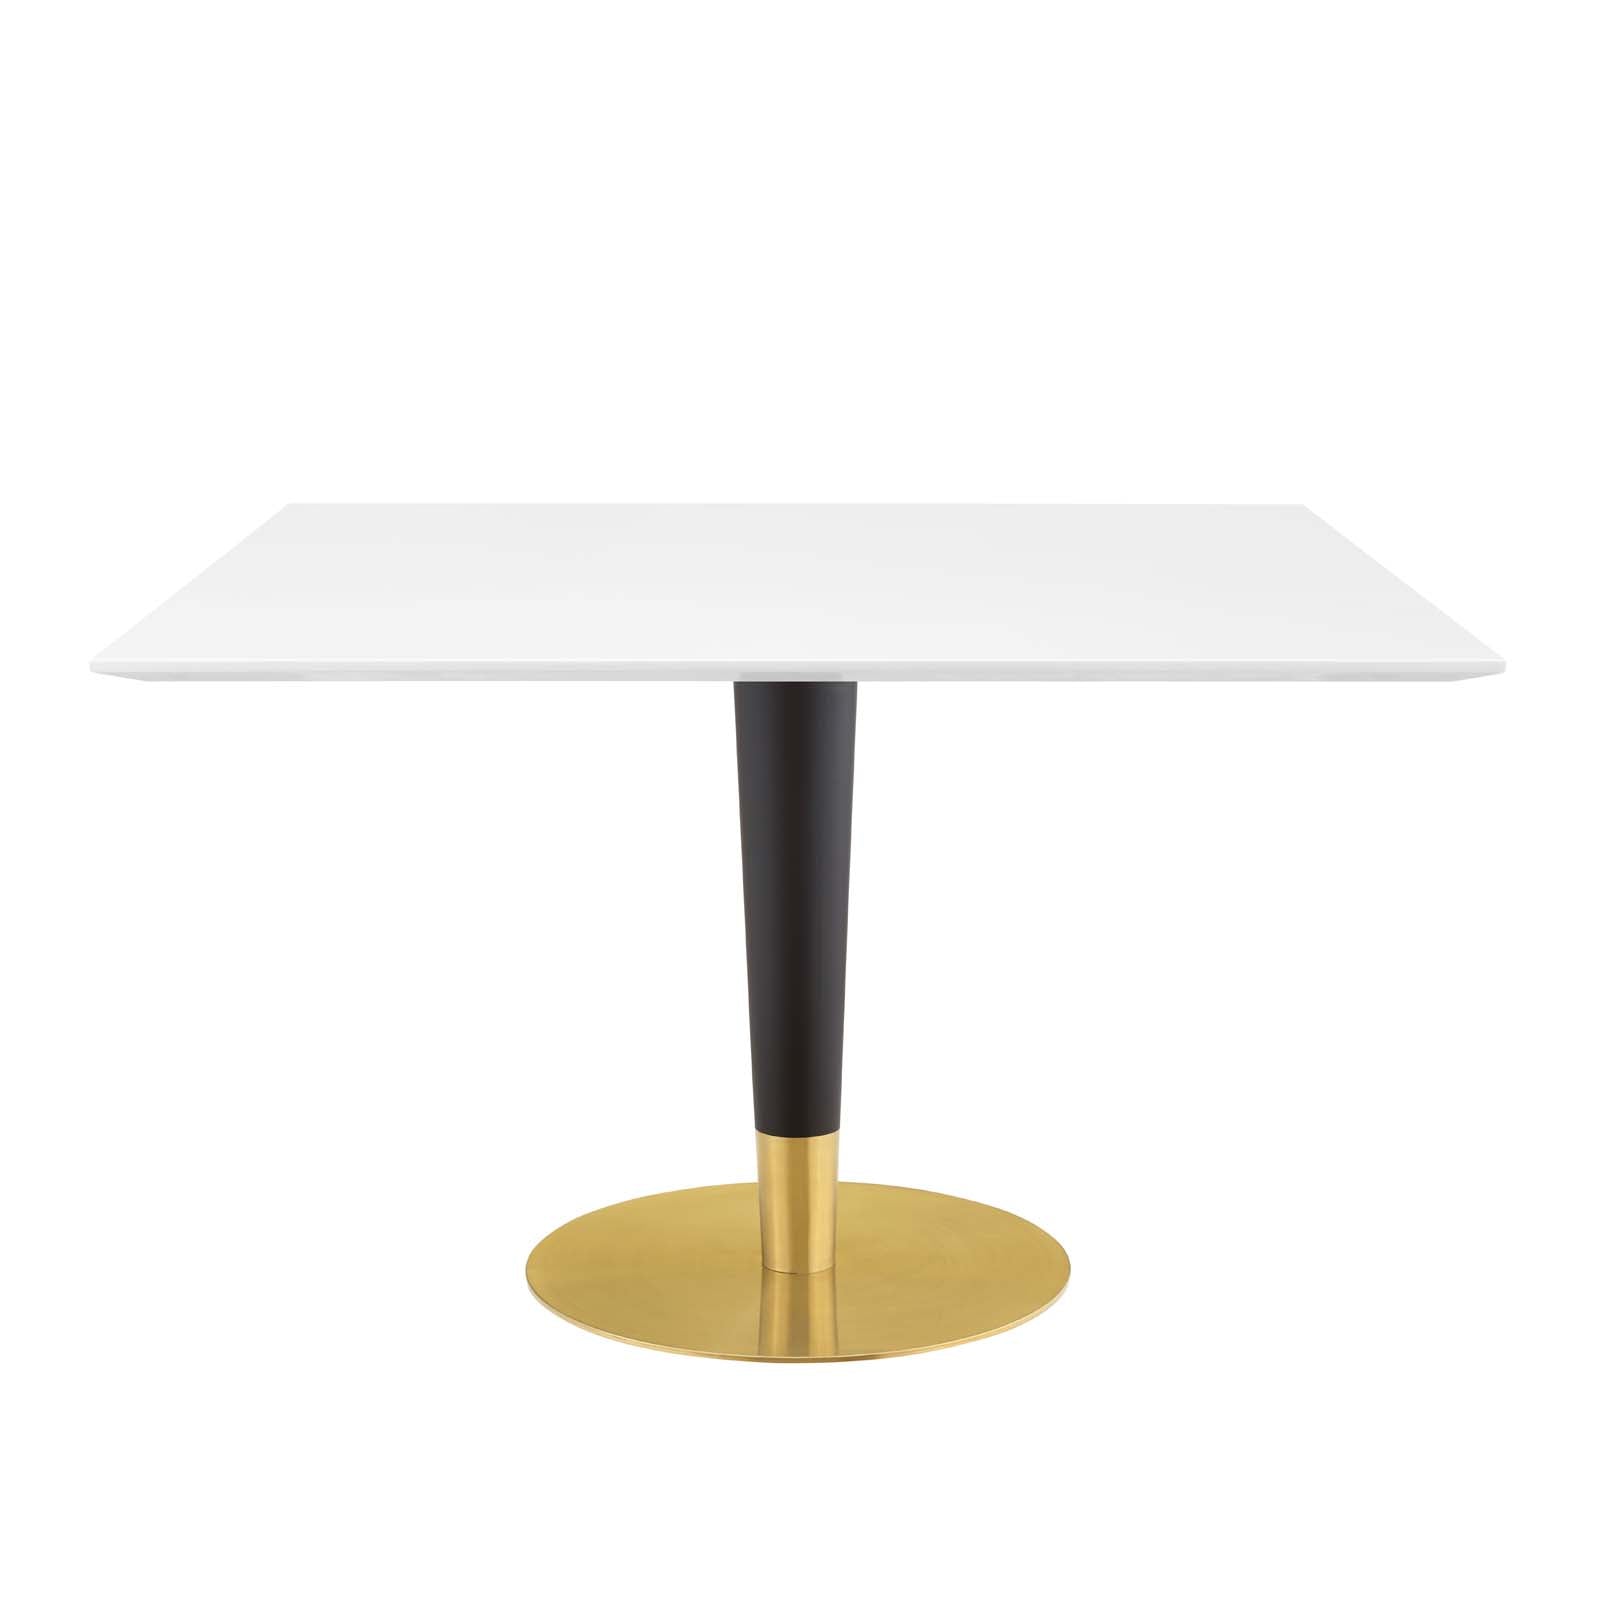 Zinque 47" Square Dining Table - East Shore Modern Home Furnishings